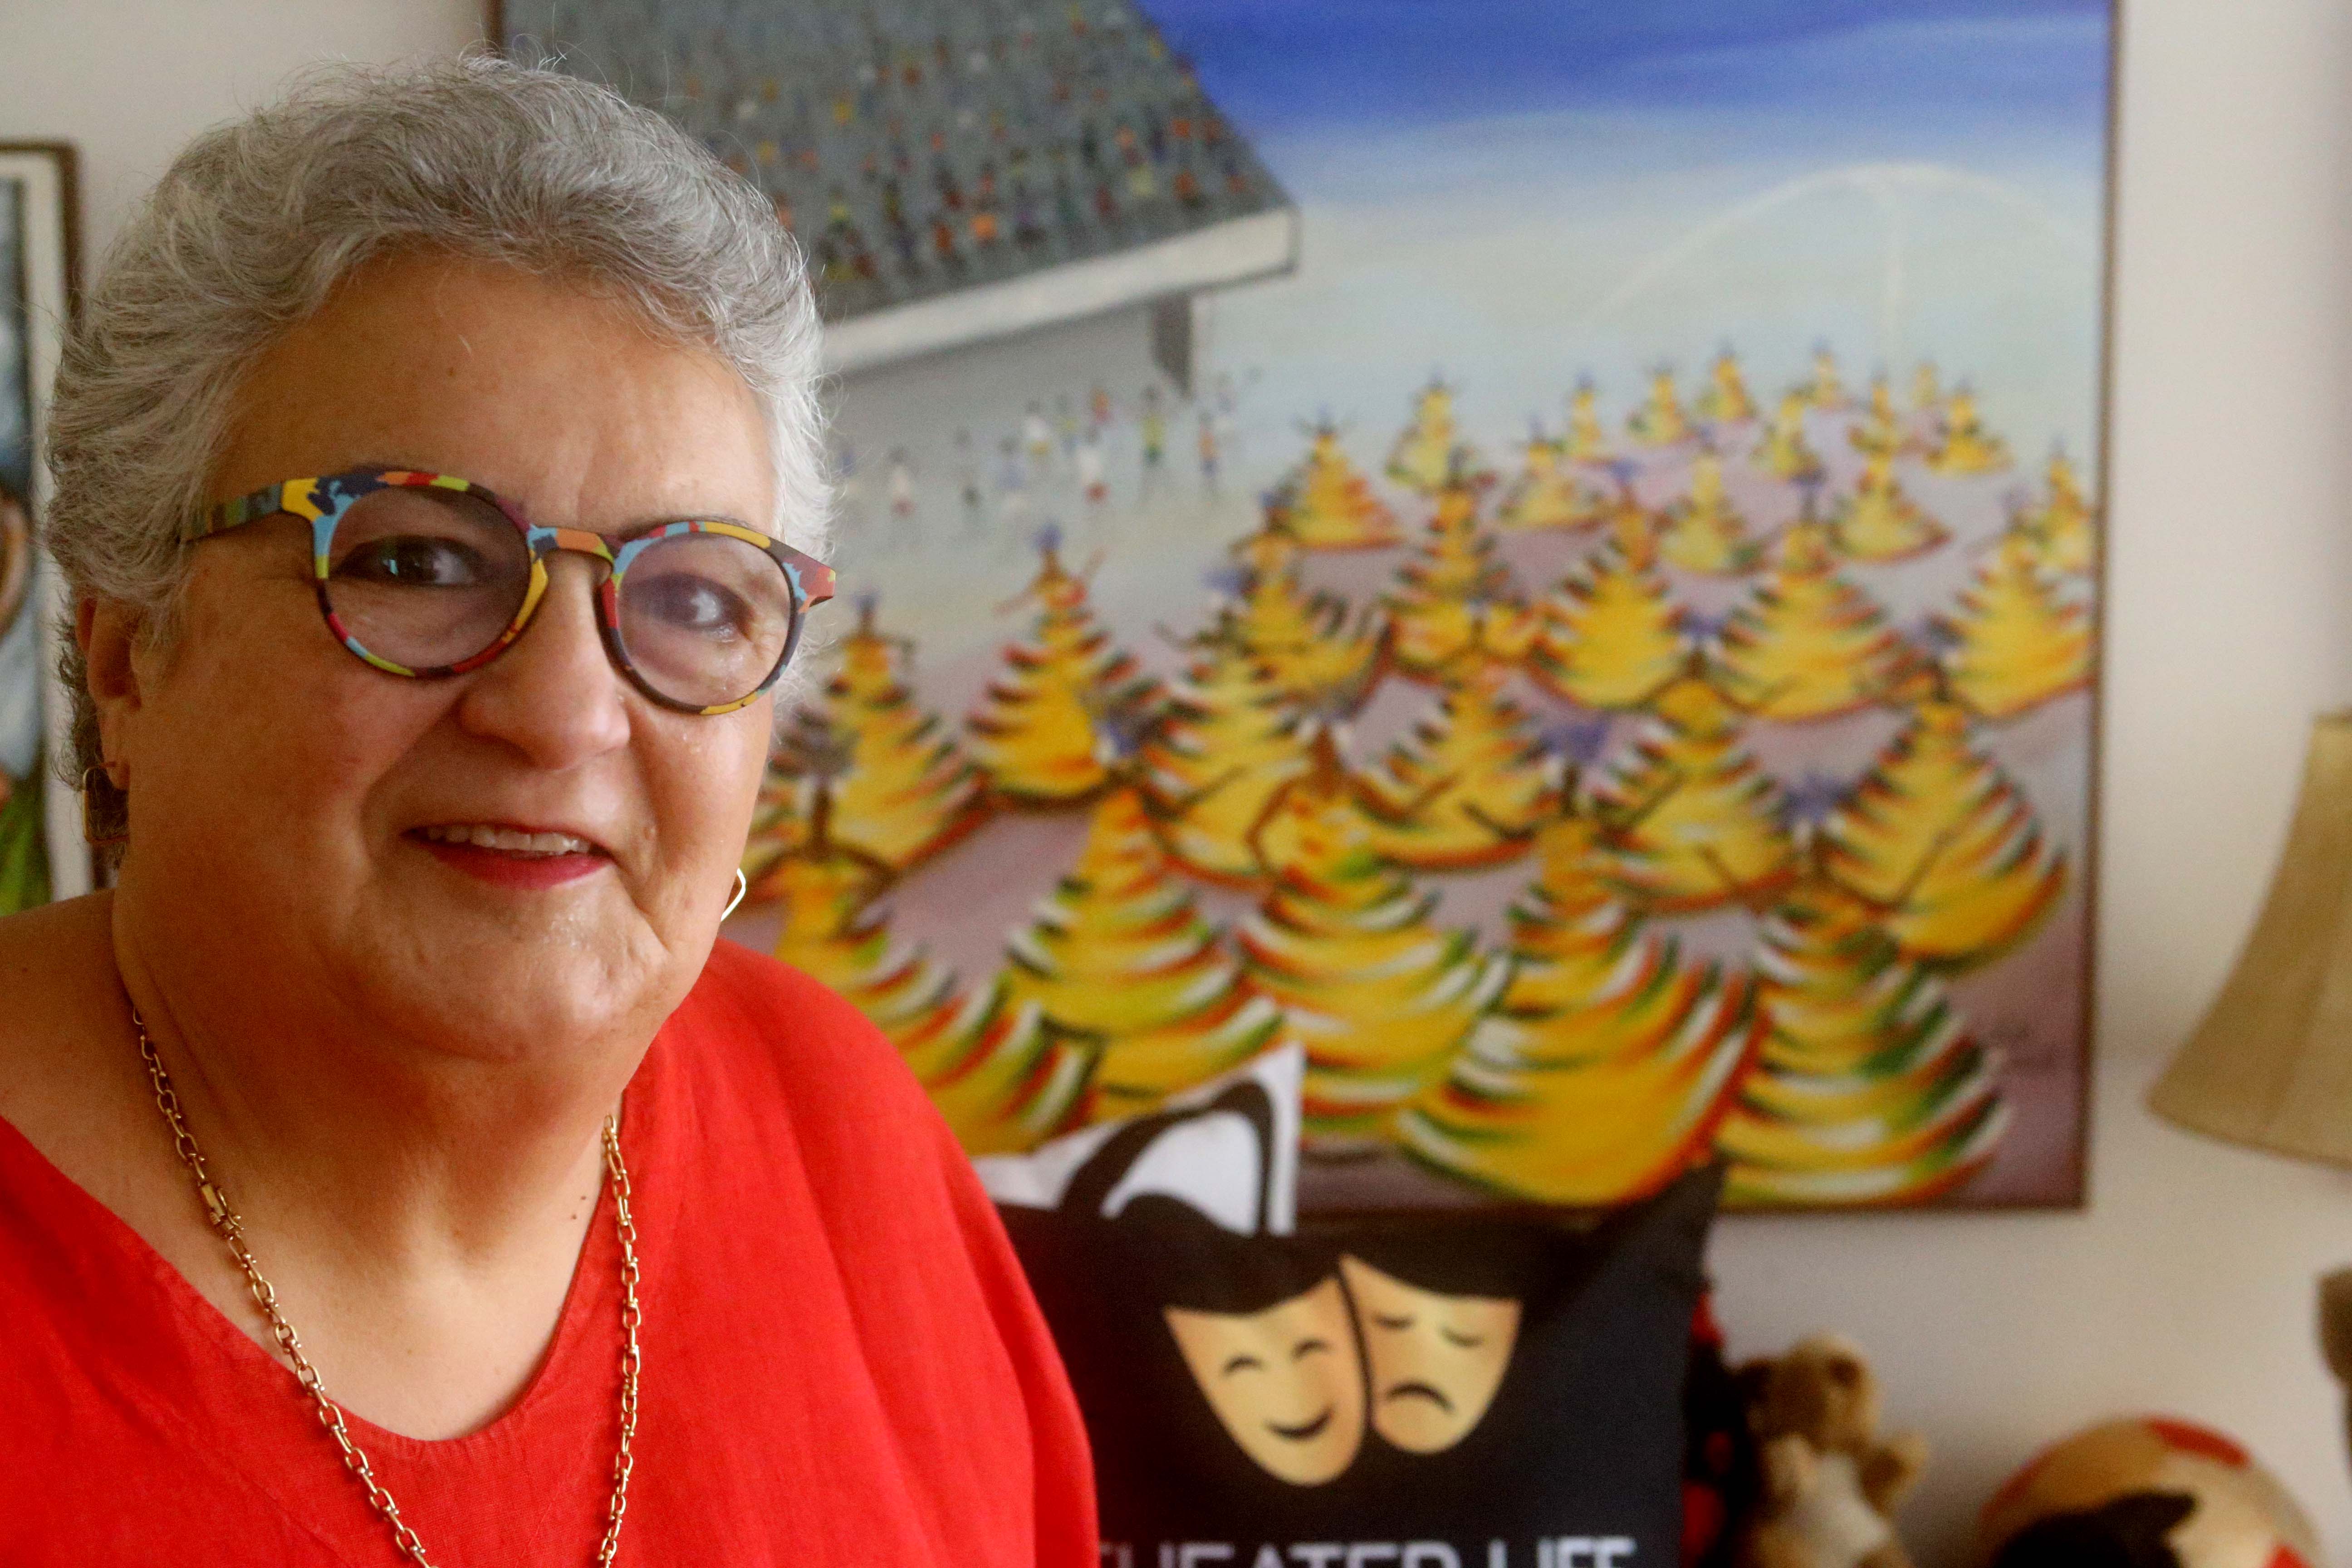 image What you see is what you get: Cyprus’ light-hearted feminist